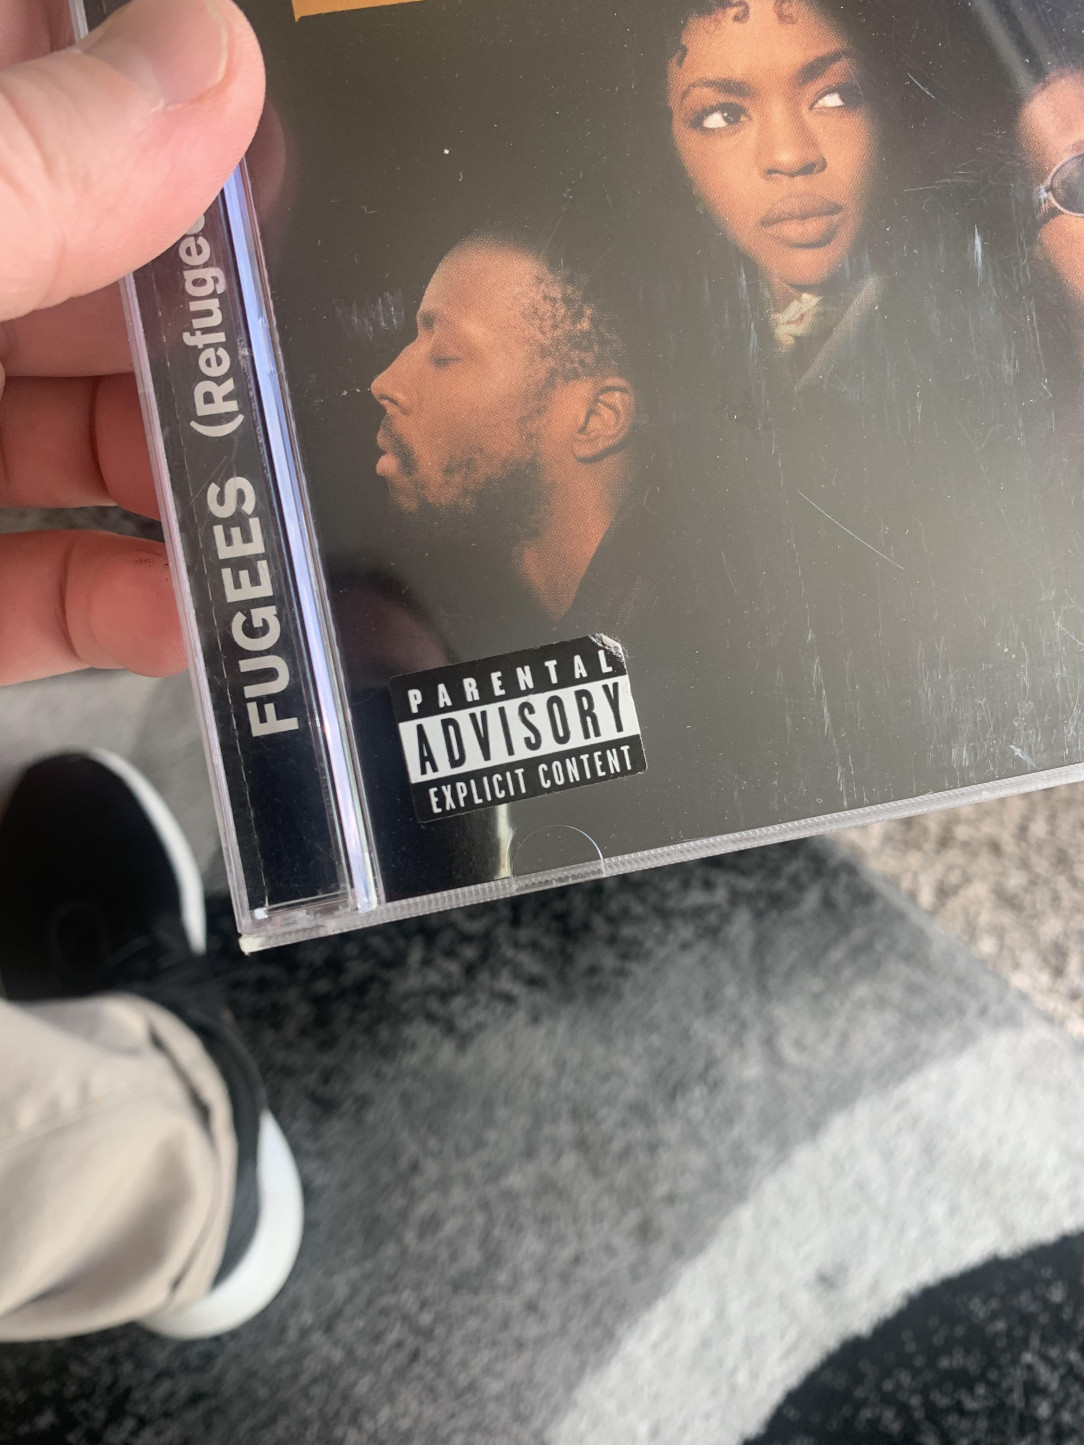 Parental Advisory stickers on tapes and CDs